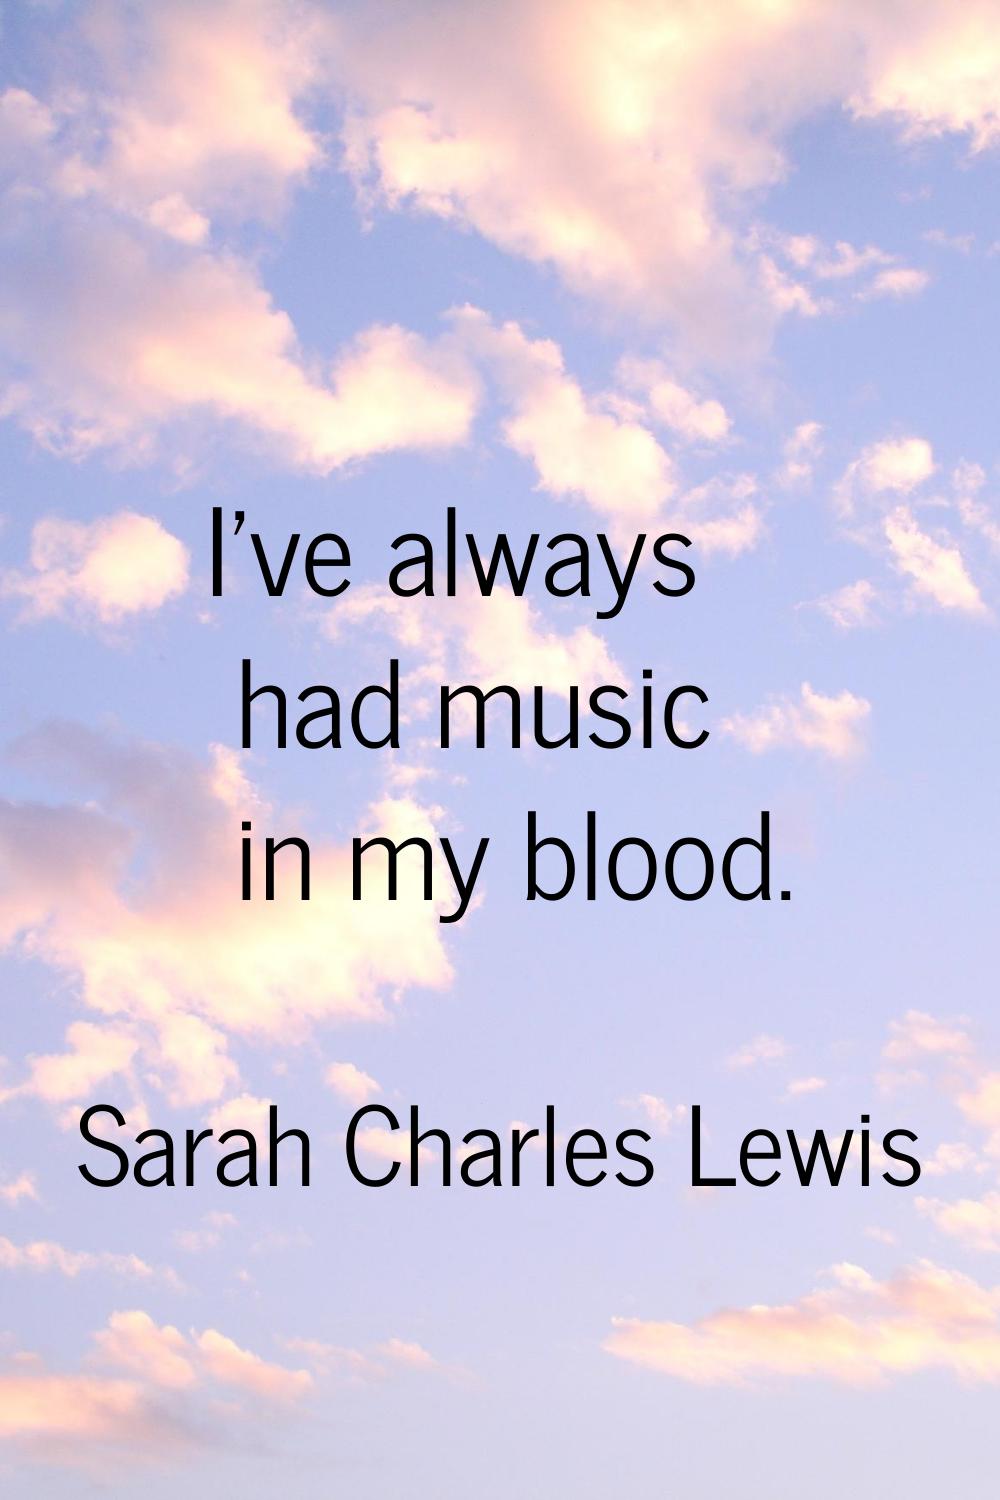 I've always had music in my blood.